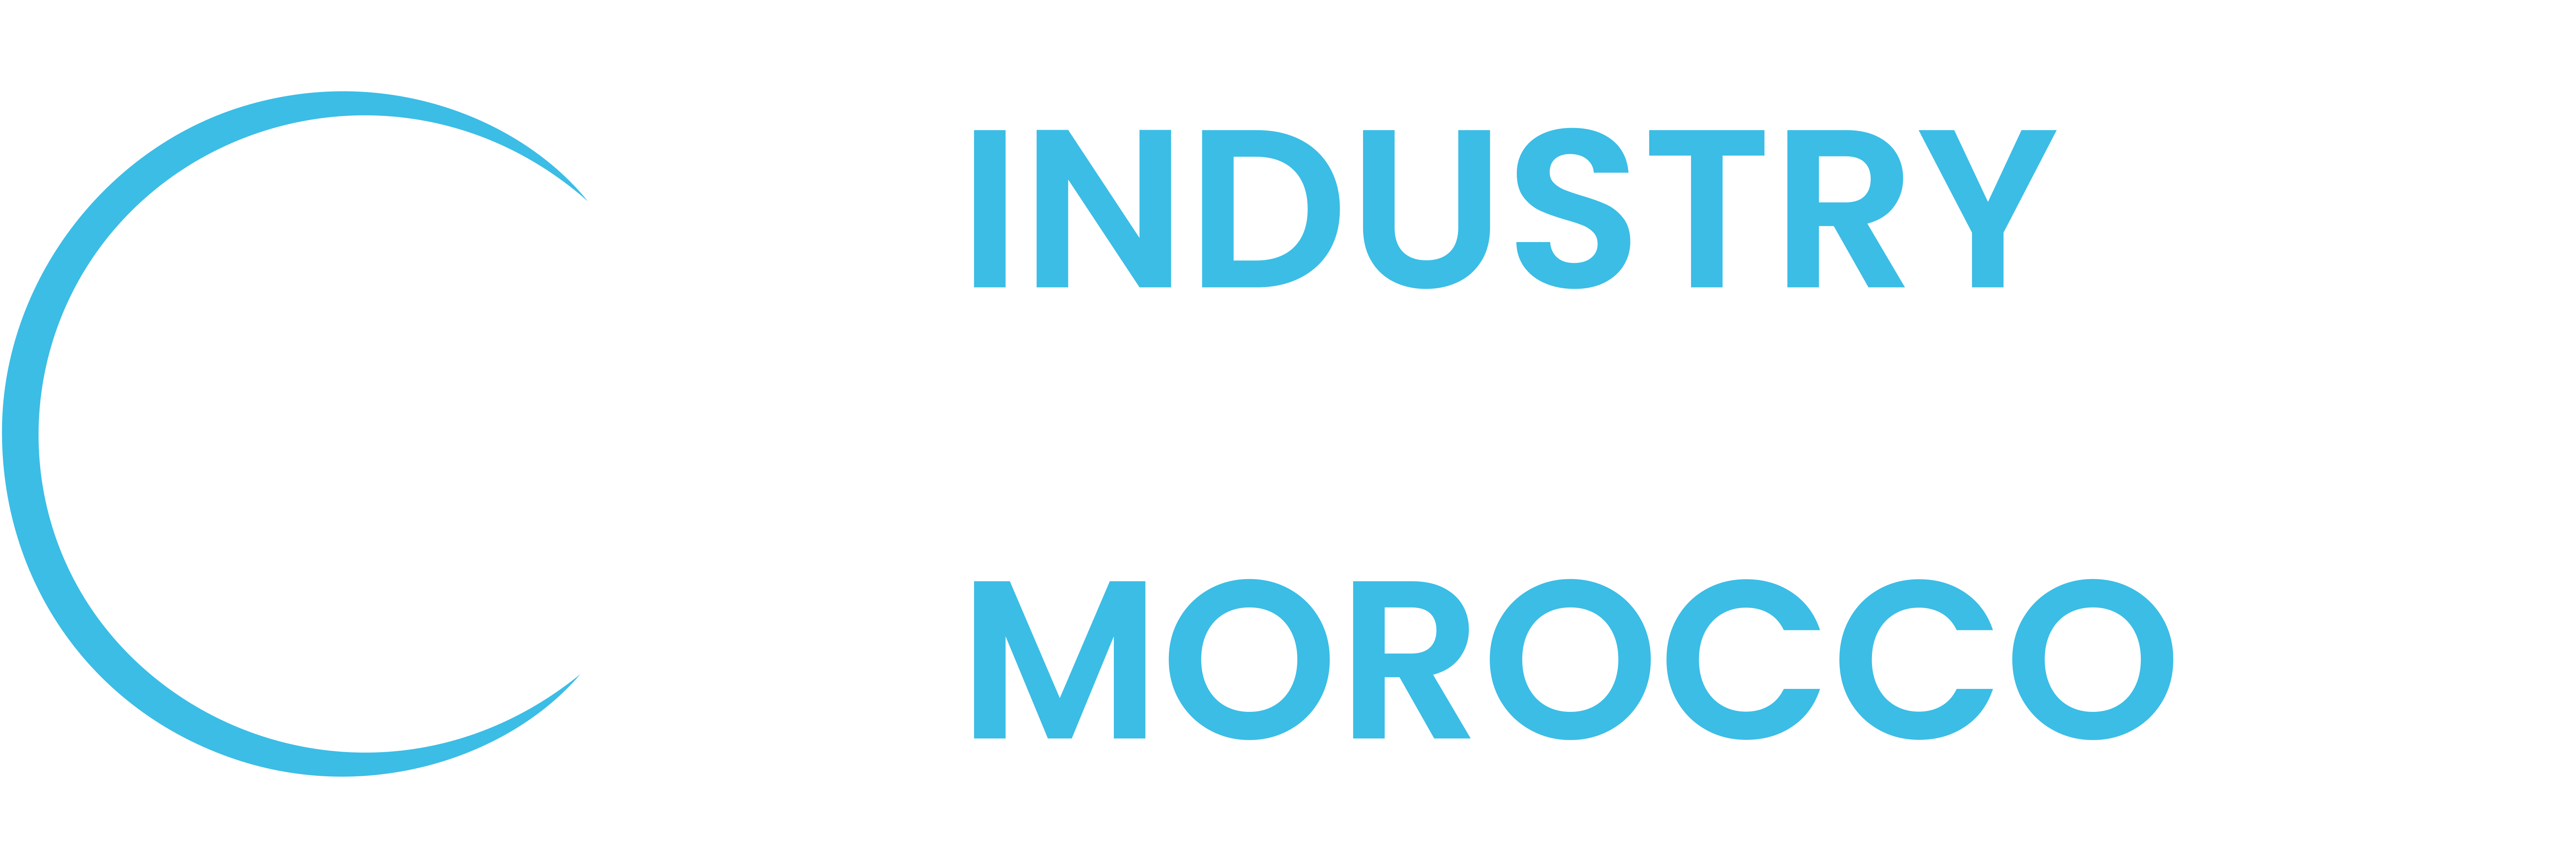 Industry Meeting Day Morocco